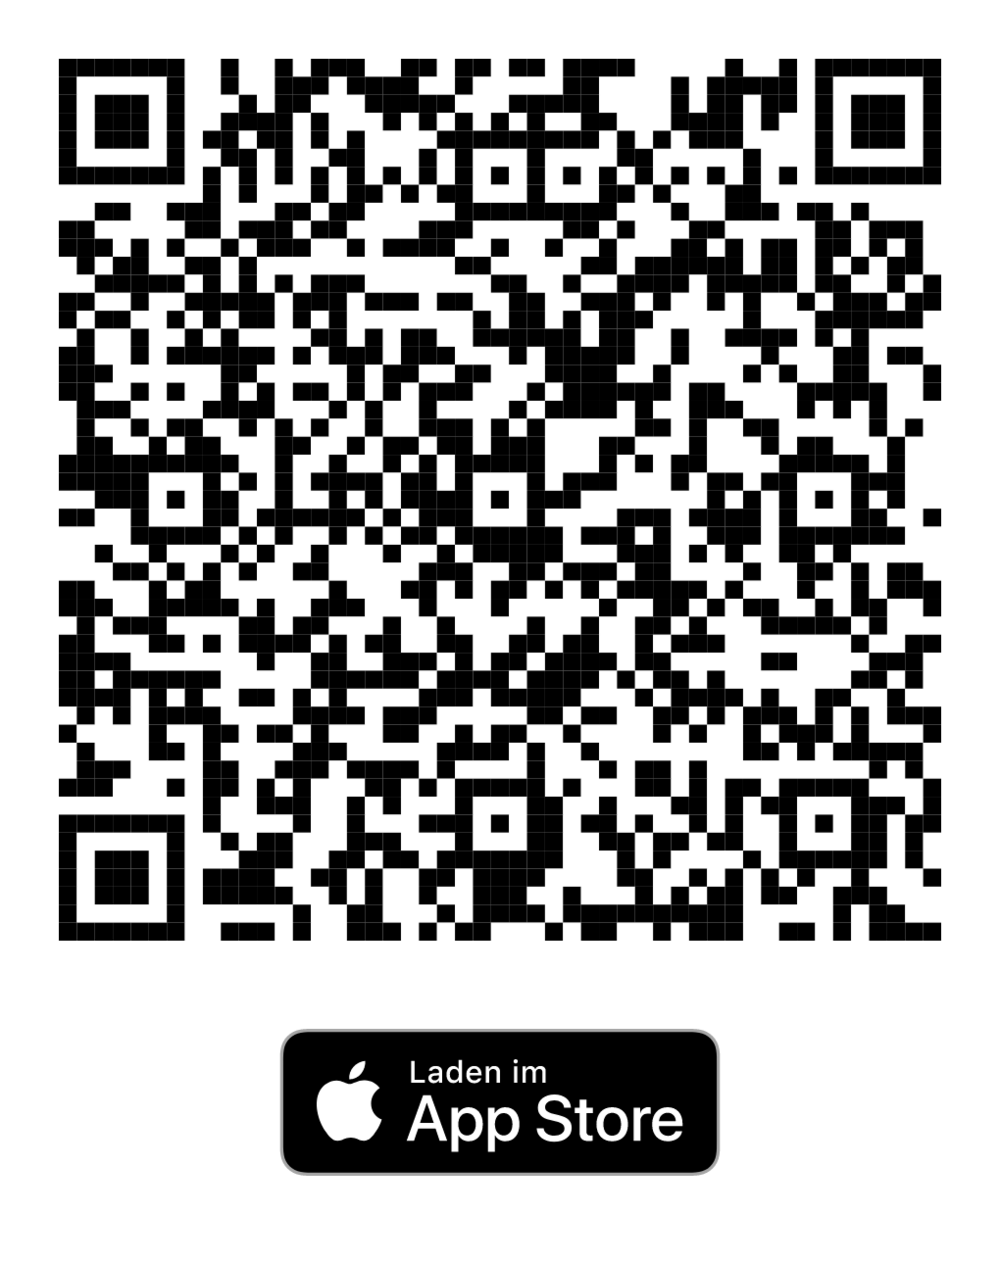 Use your iPhone to scan the QR-code and download youni 